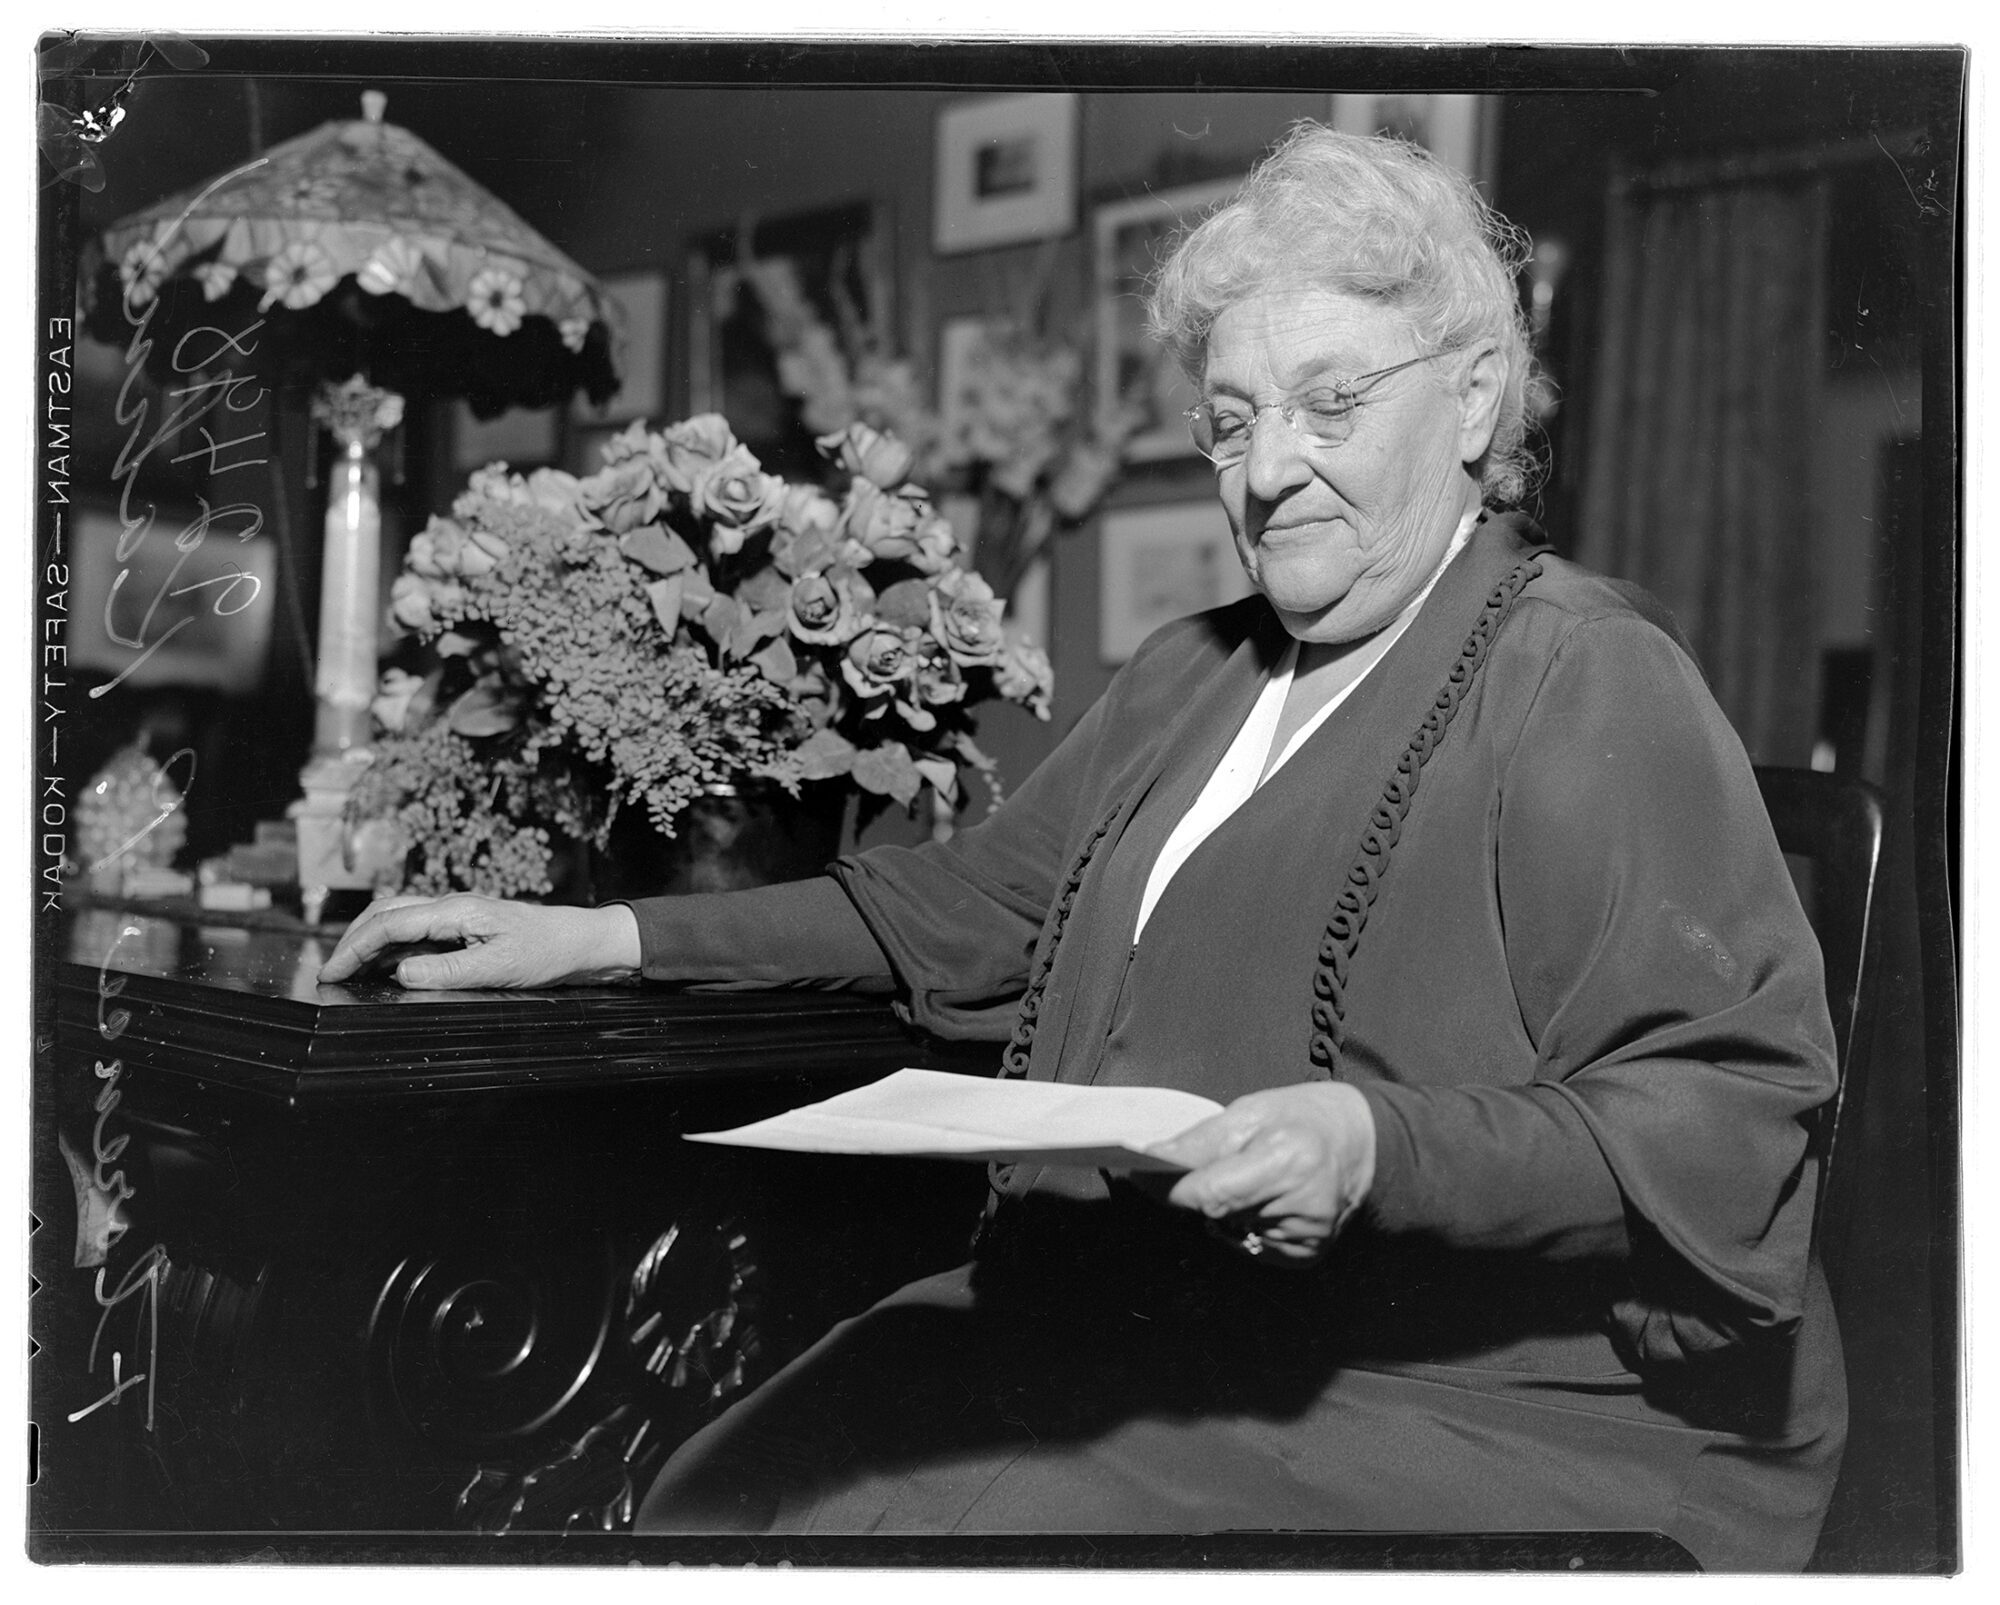 Florence Prag Kahn served five terms in Congress from 1925 to 1937.